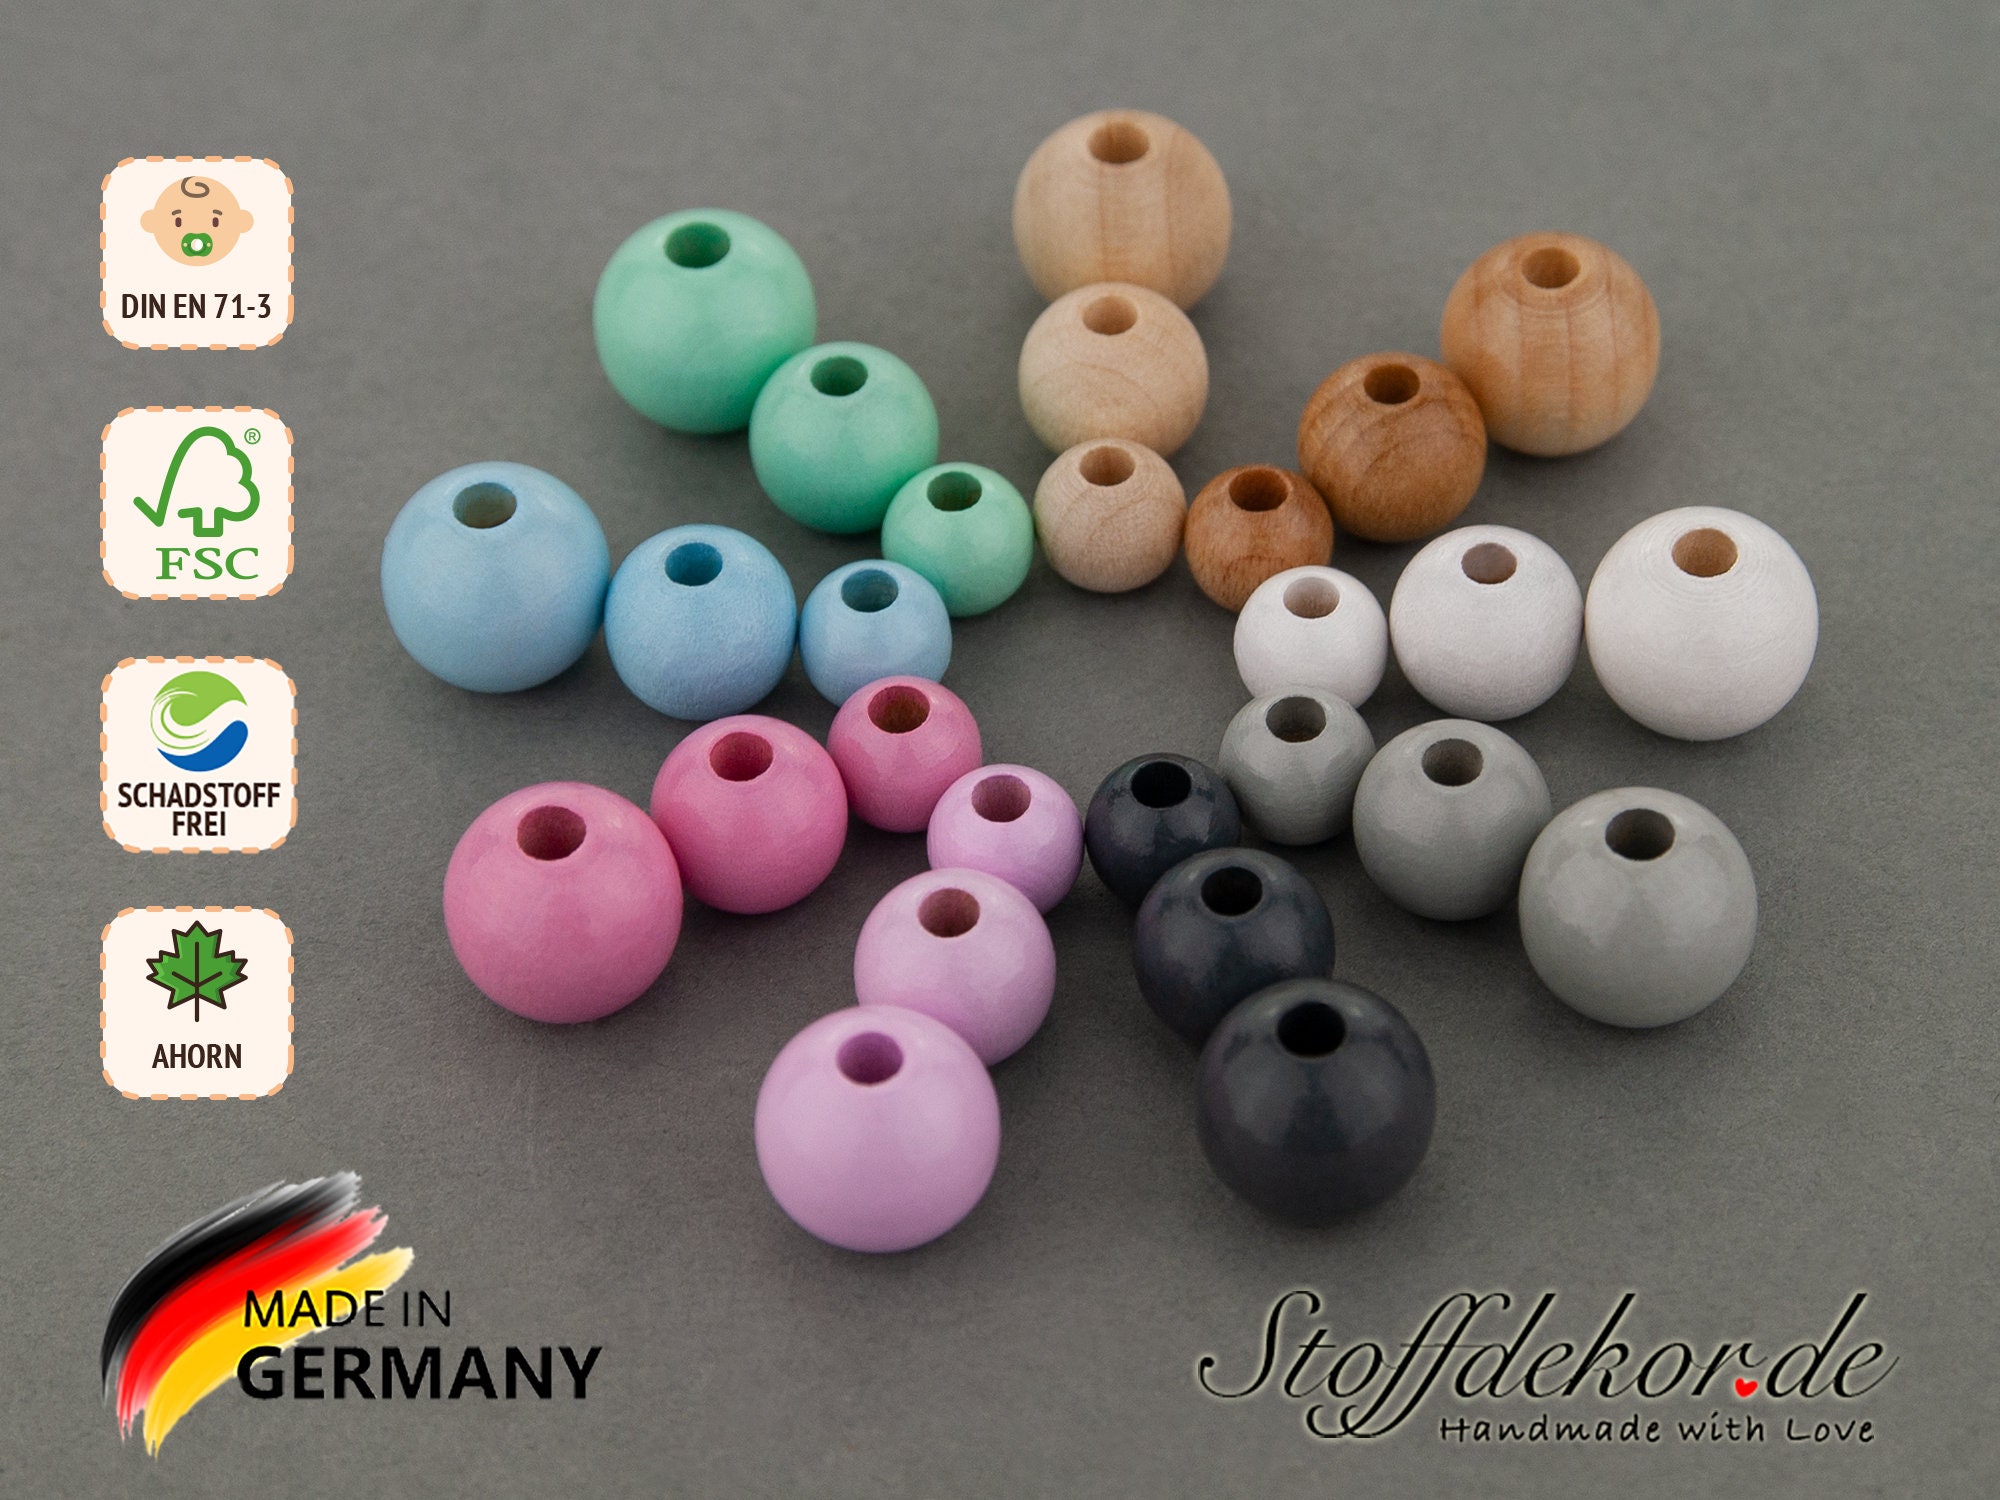 100 Painted White Wood Beads 20mm with 3mm Hole